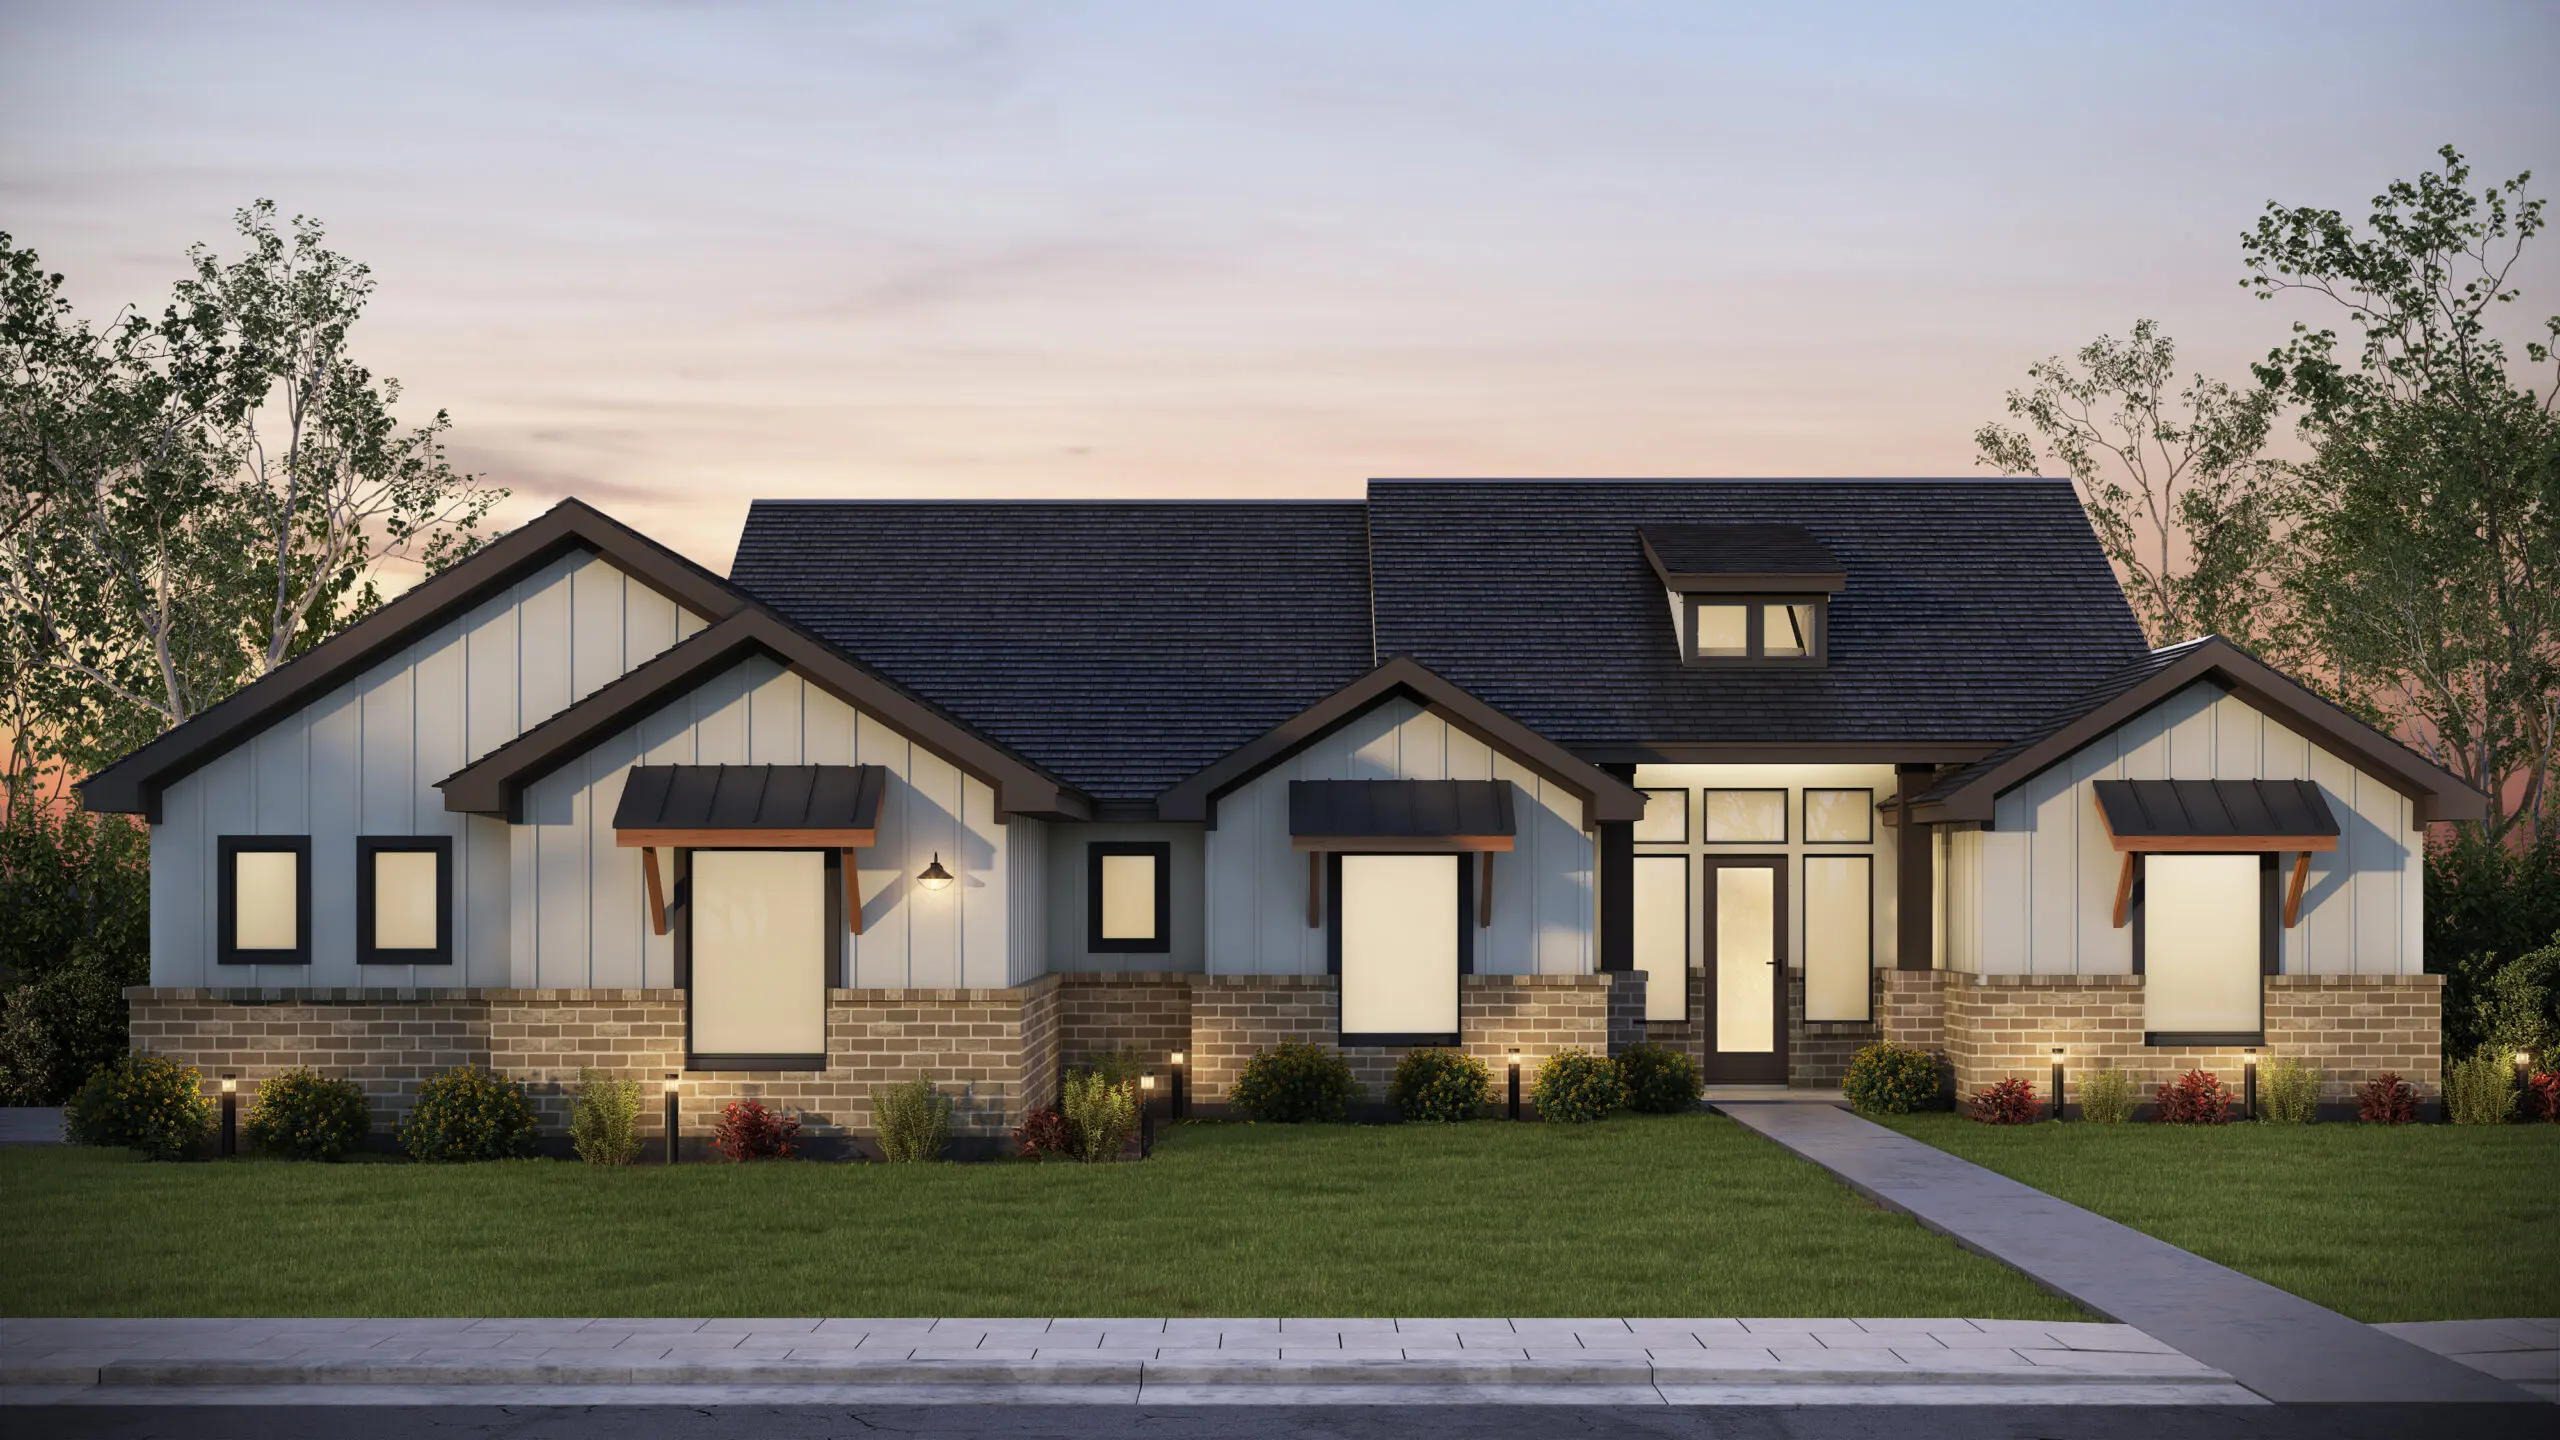 Top 5 Benefits of Touring New Home Construction Before Buying